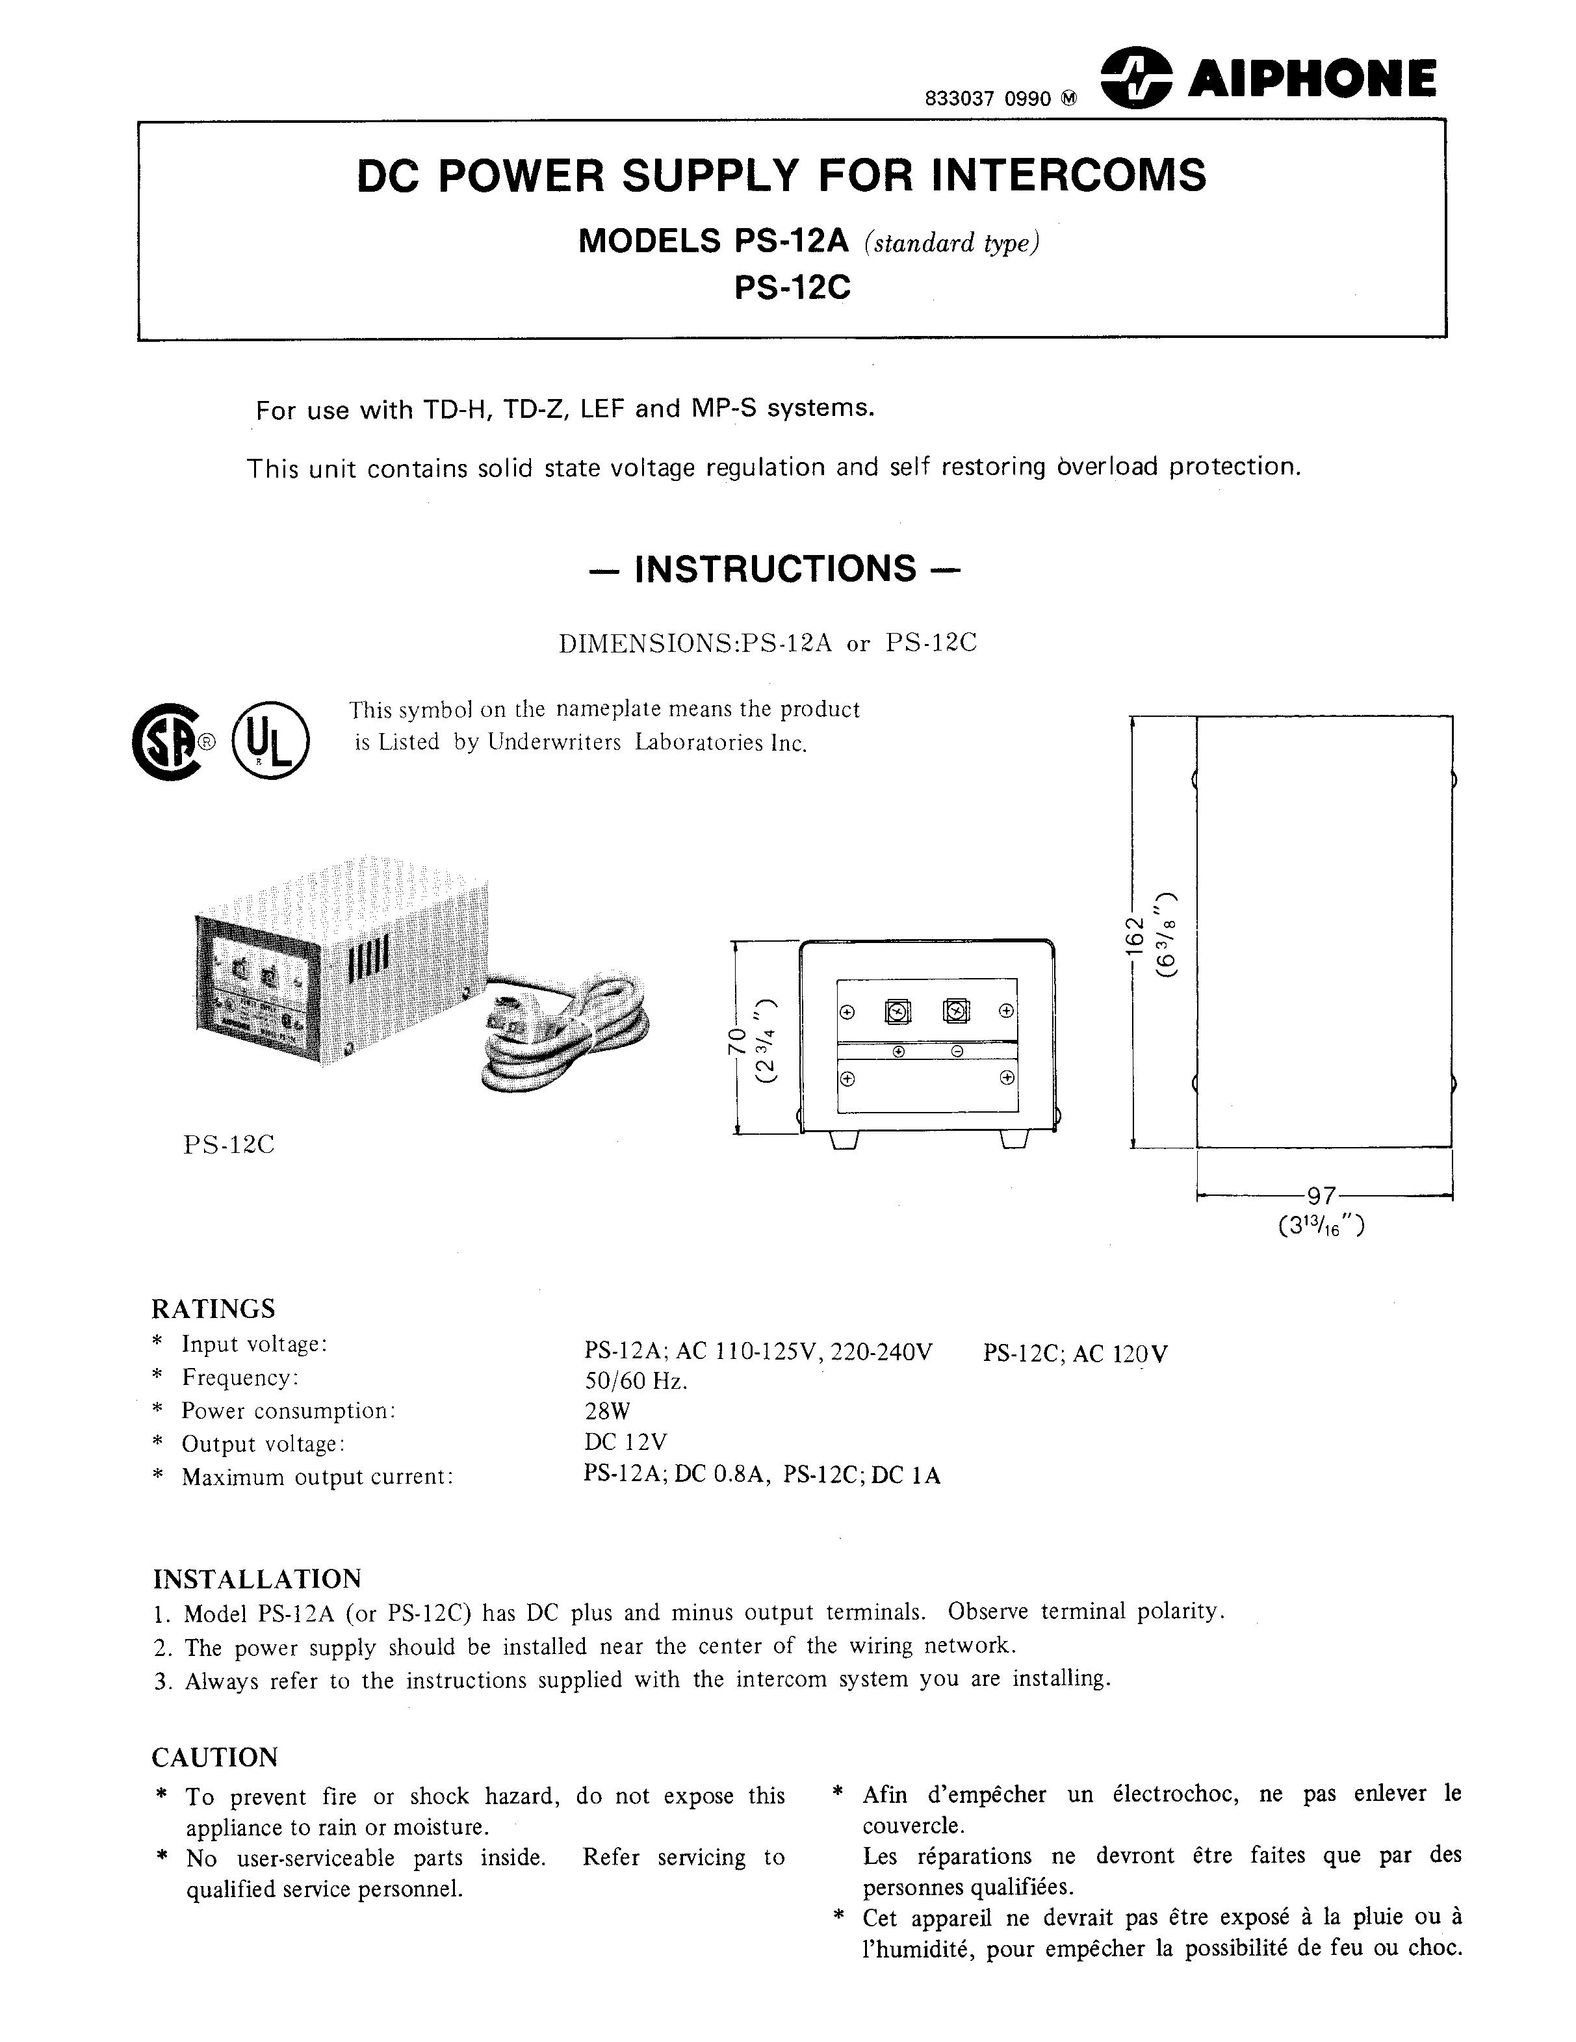 Aiphone PS-12A Power Supply User Manual